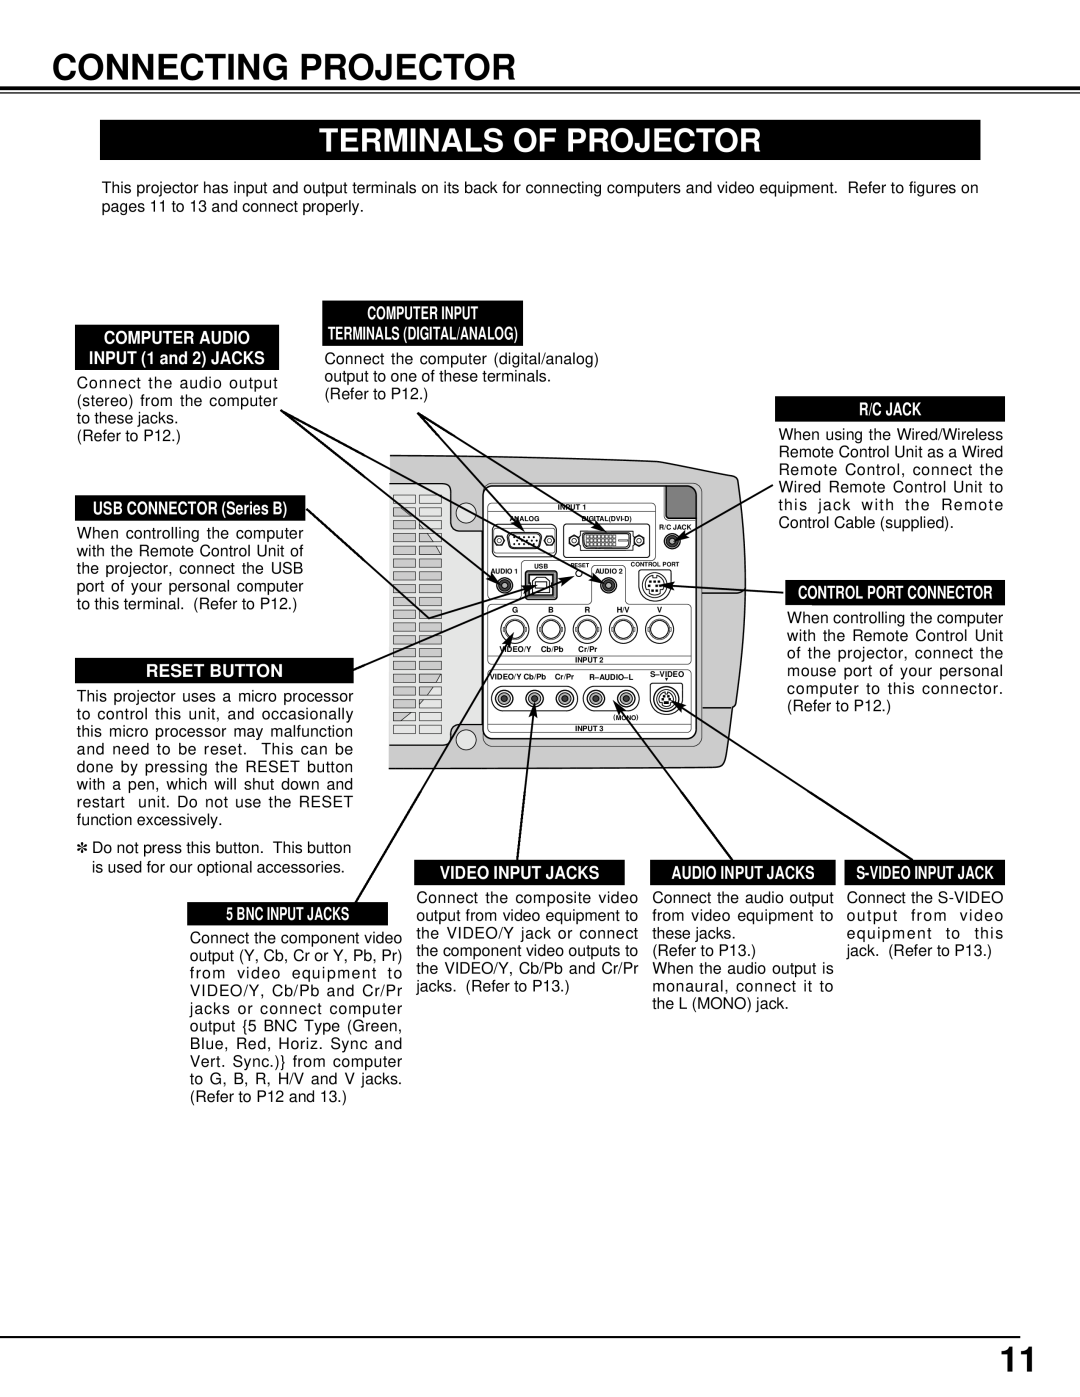 Christie Digital Systems 38-VIV205-01 user manual Connecting Projector, Terminals Of Projector 